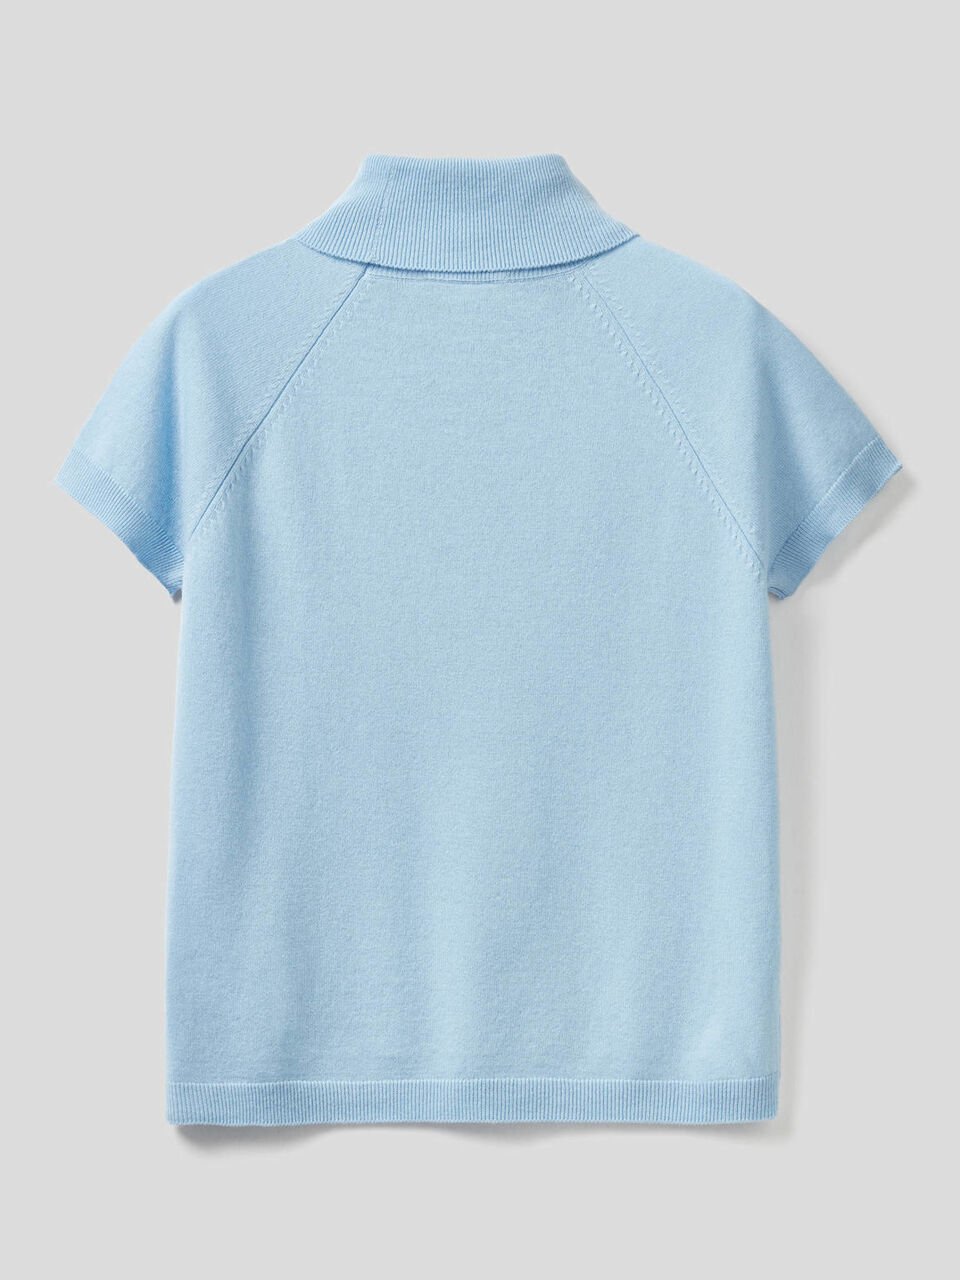 Light blue turtleneck with short sleeves in cashmere and wool blend